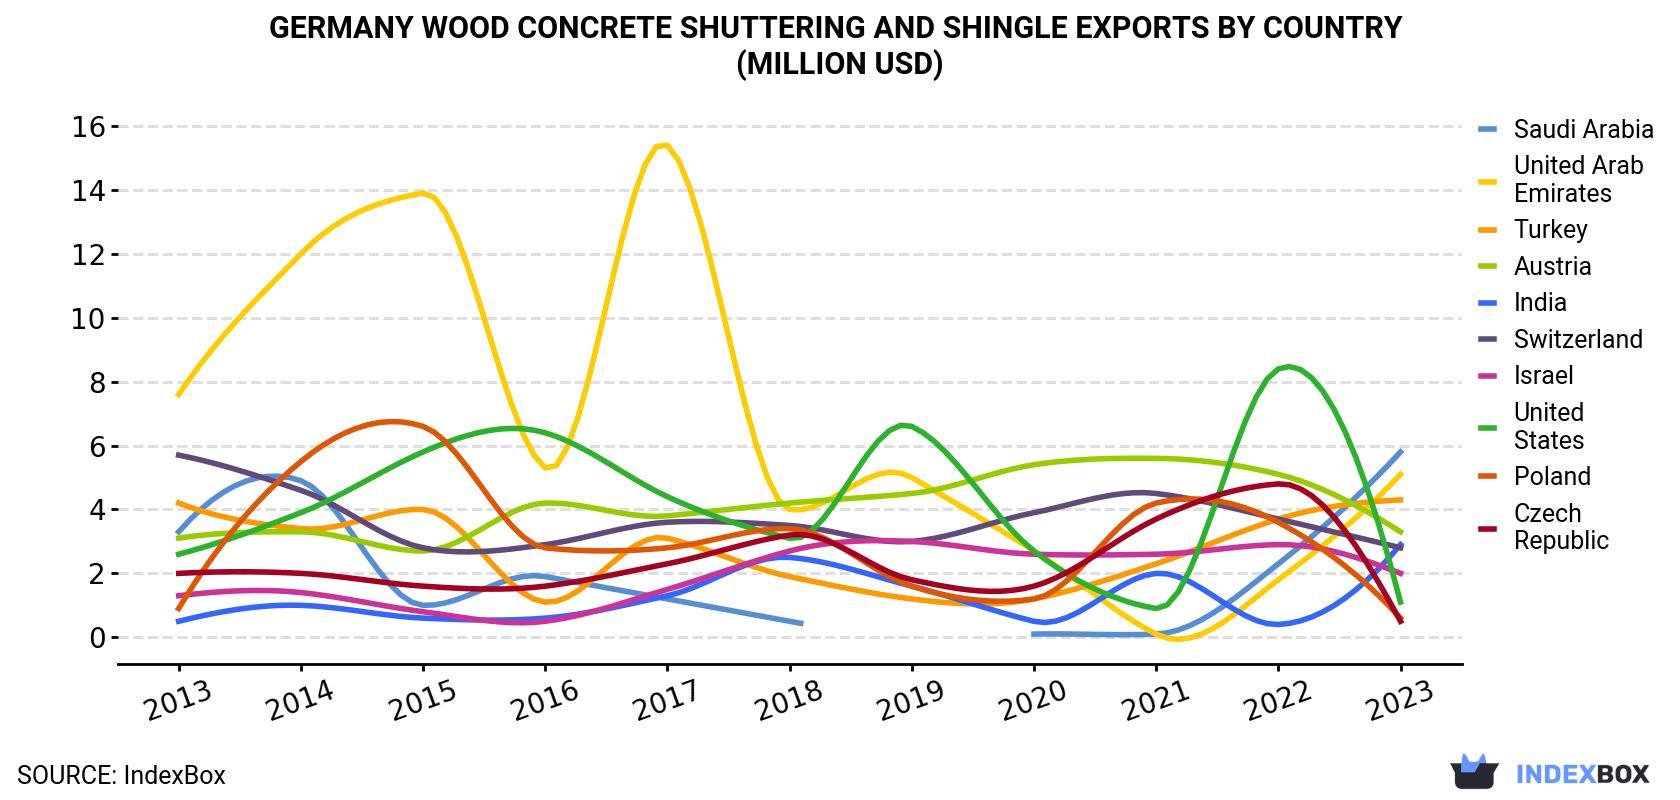 Germany Wood Concrete Shuttering and Shingle Exports By Country (Million USD)